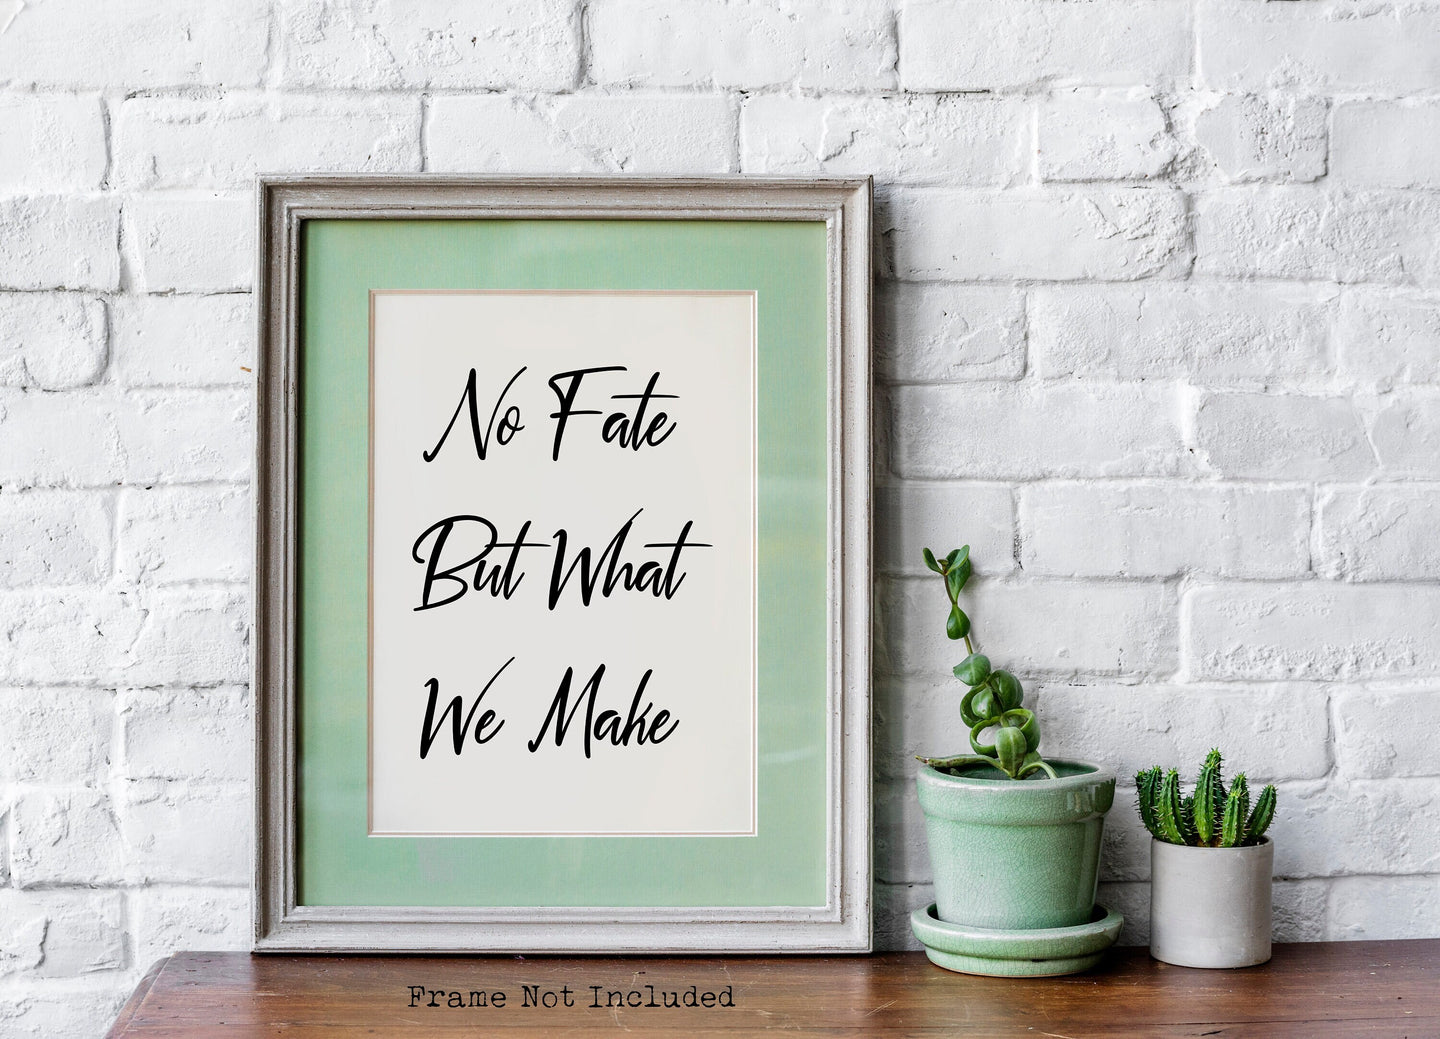 Terminator Quote print, No fate but what we make, Black and White Art Print for Home Decor, Minimalist Wall Art movie quote UNFRAMED